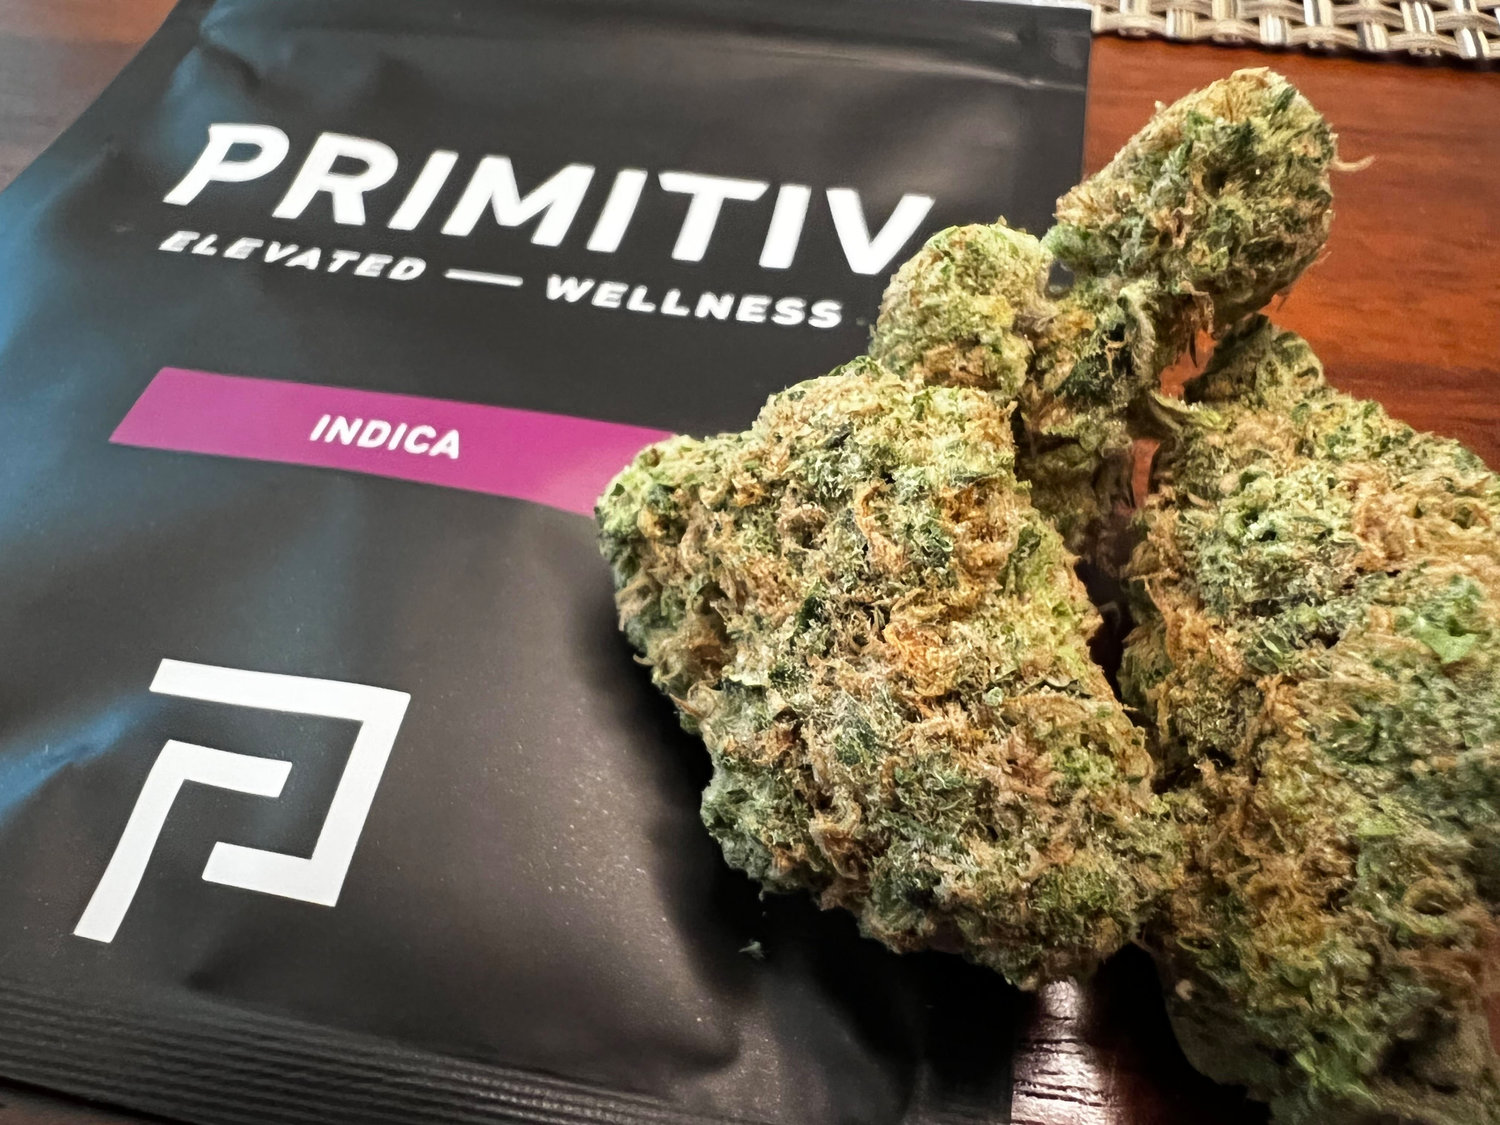 Sensi Star 
$30/3.5g at Primitiv 

This strain is a great example of how the terms “indica” and “sativa” are pretty much useless conjectures. Because for me, this so-called “indica” packed a real energetic punch that ended up gluing me into a Netflix binge until about 2 a.m. Frosty, earthy, fruity buds. Maybe a touch of pine. Then, about four blissful hours of Stranger Things and a whole tube of Pringles. Success.